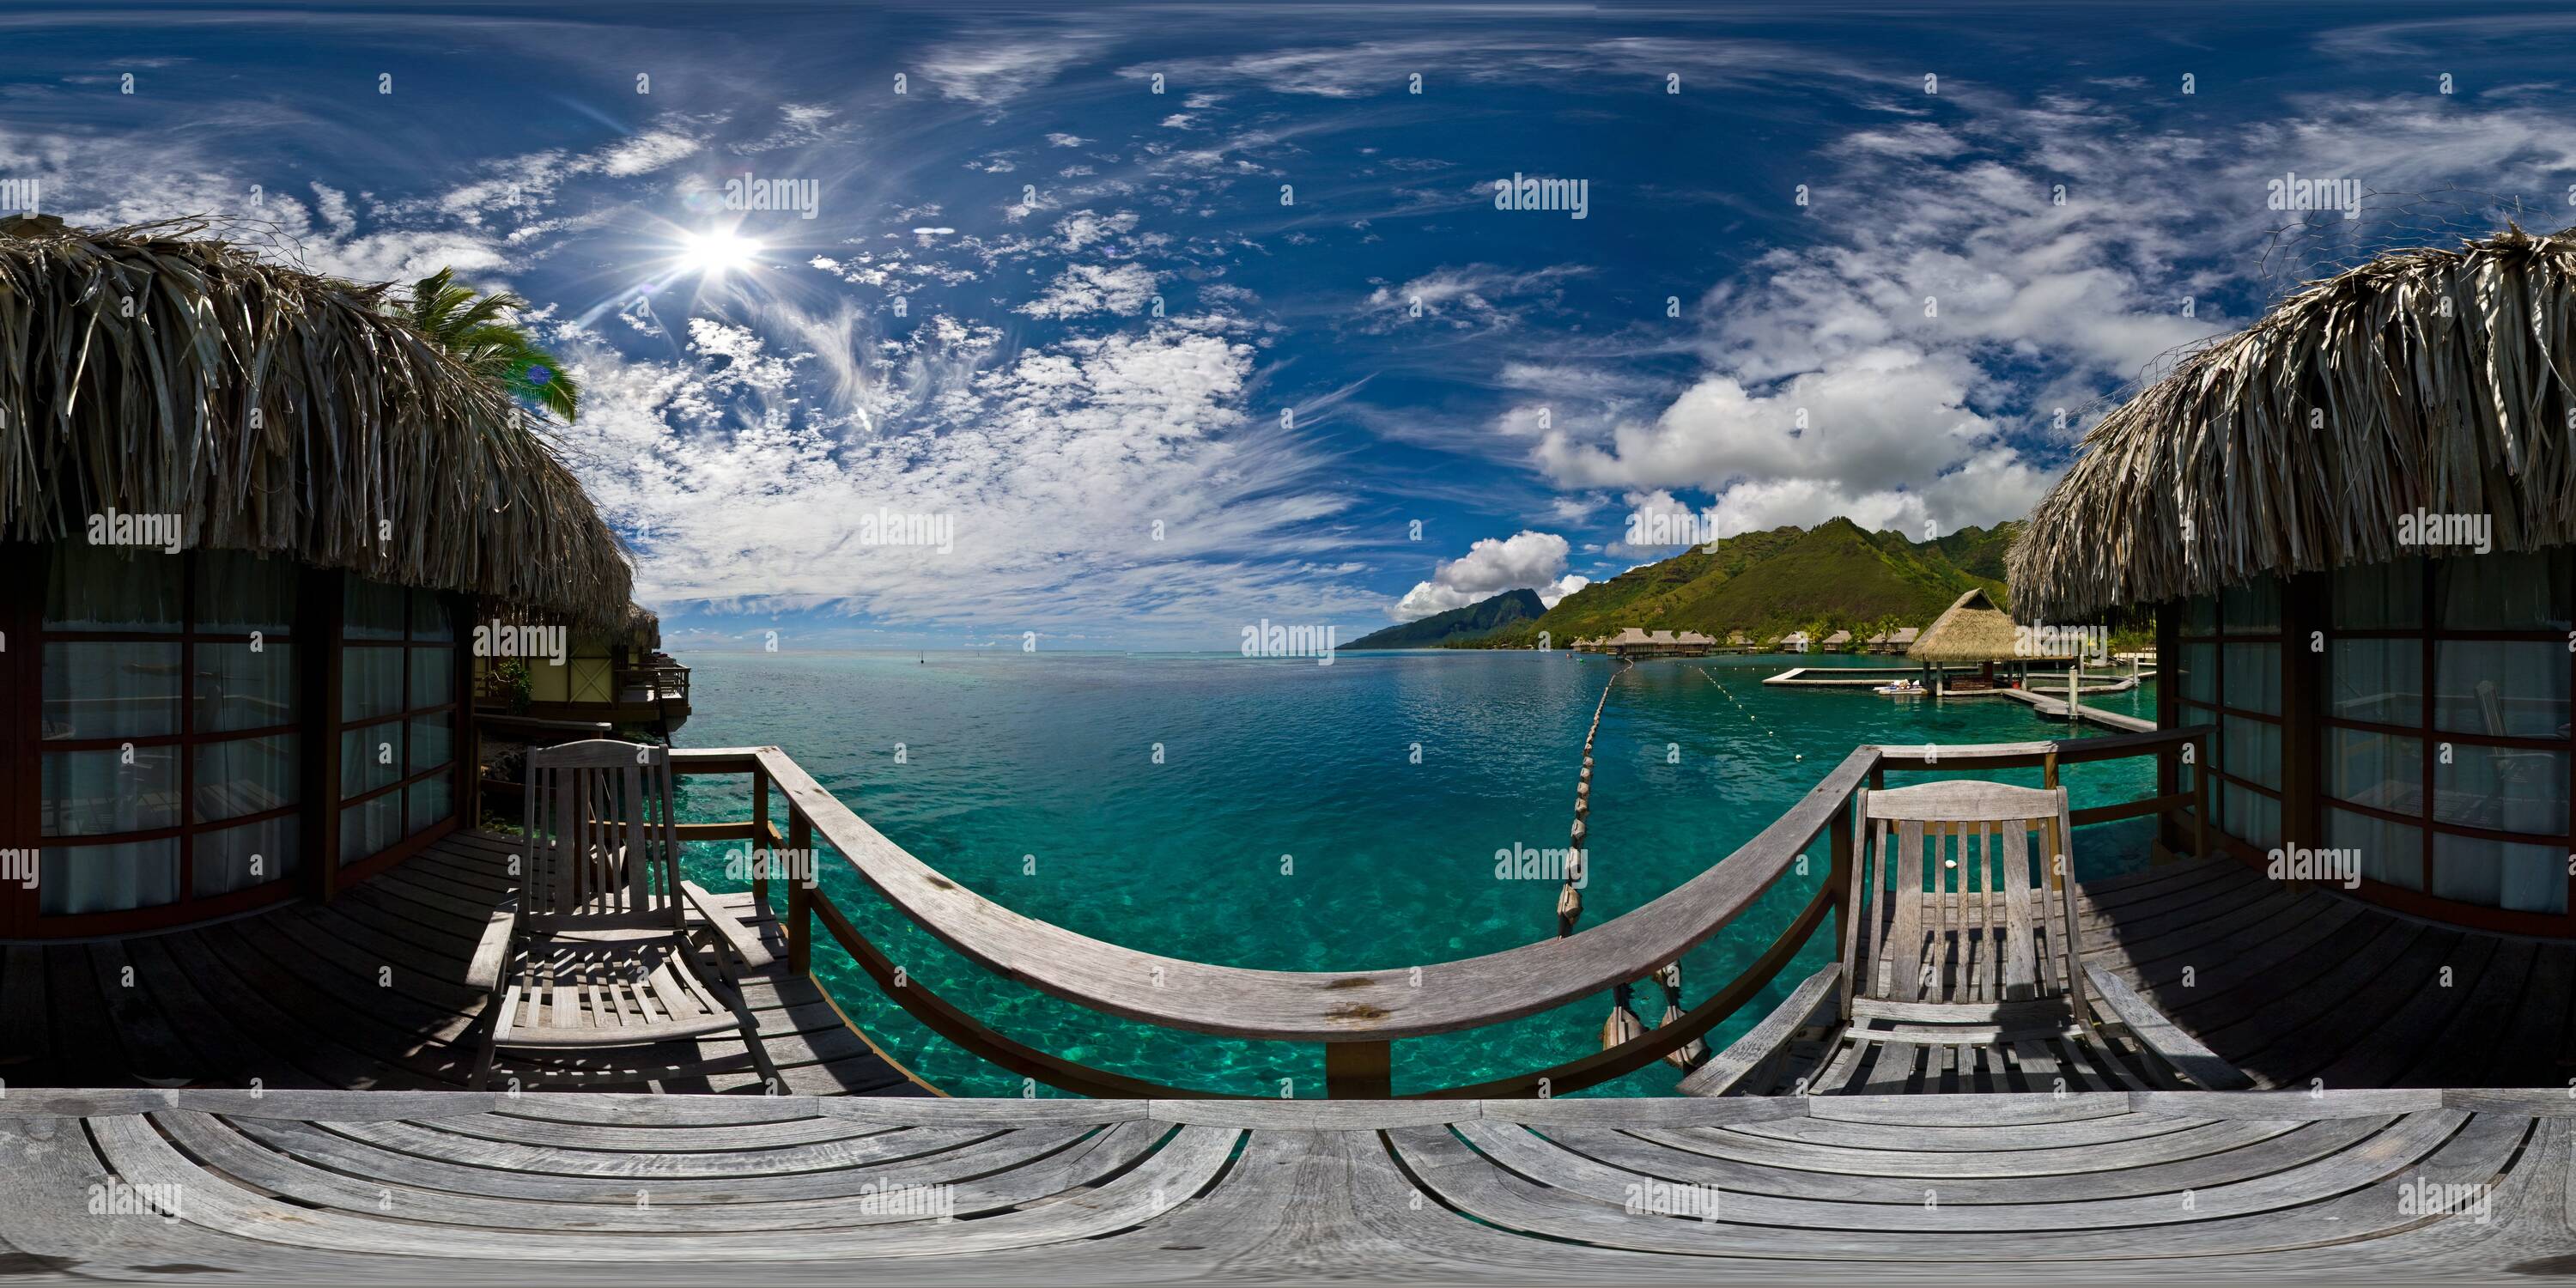 360 degree panoramic view of OverWater Bungalow Deck